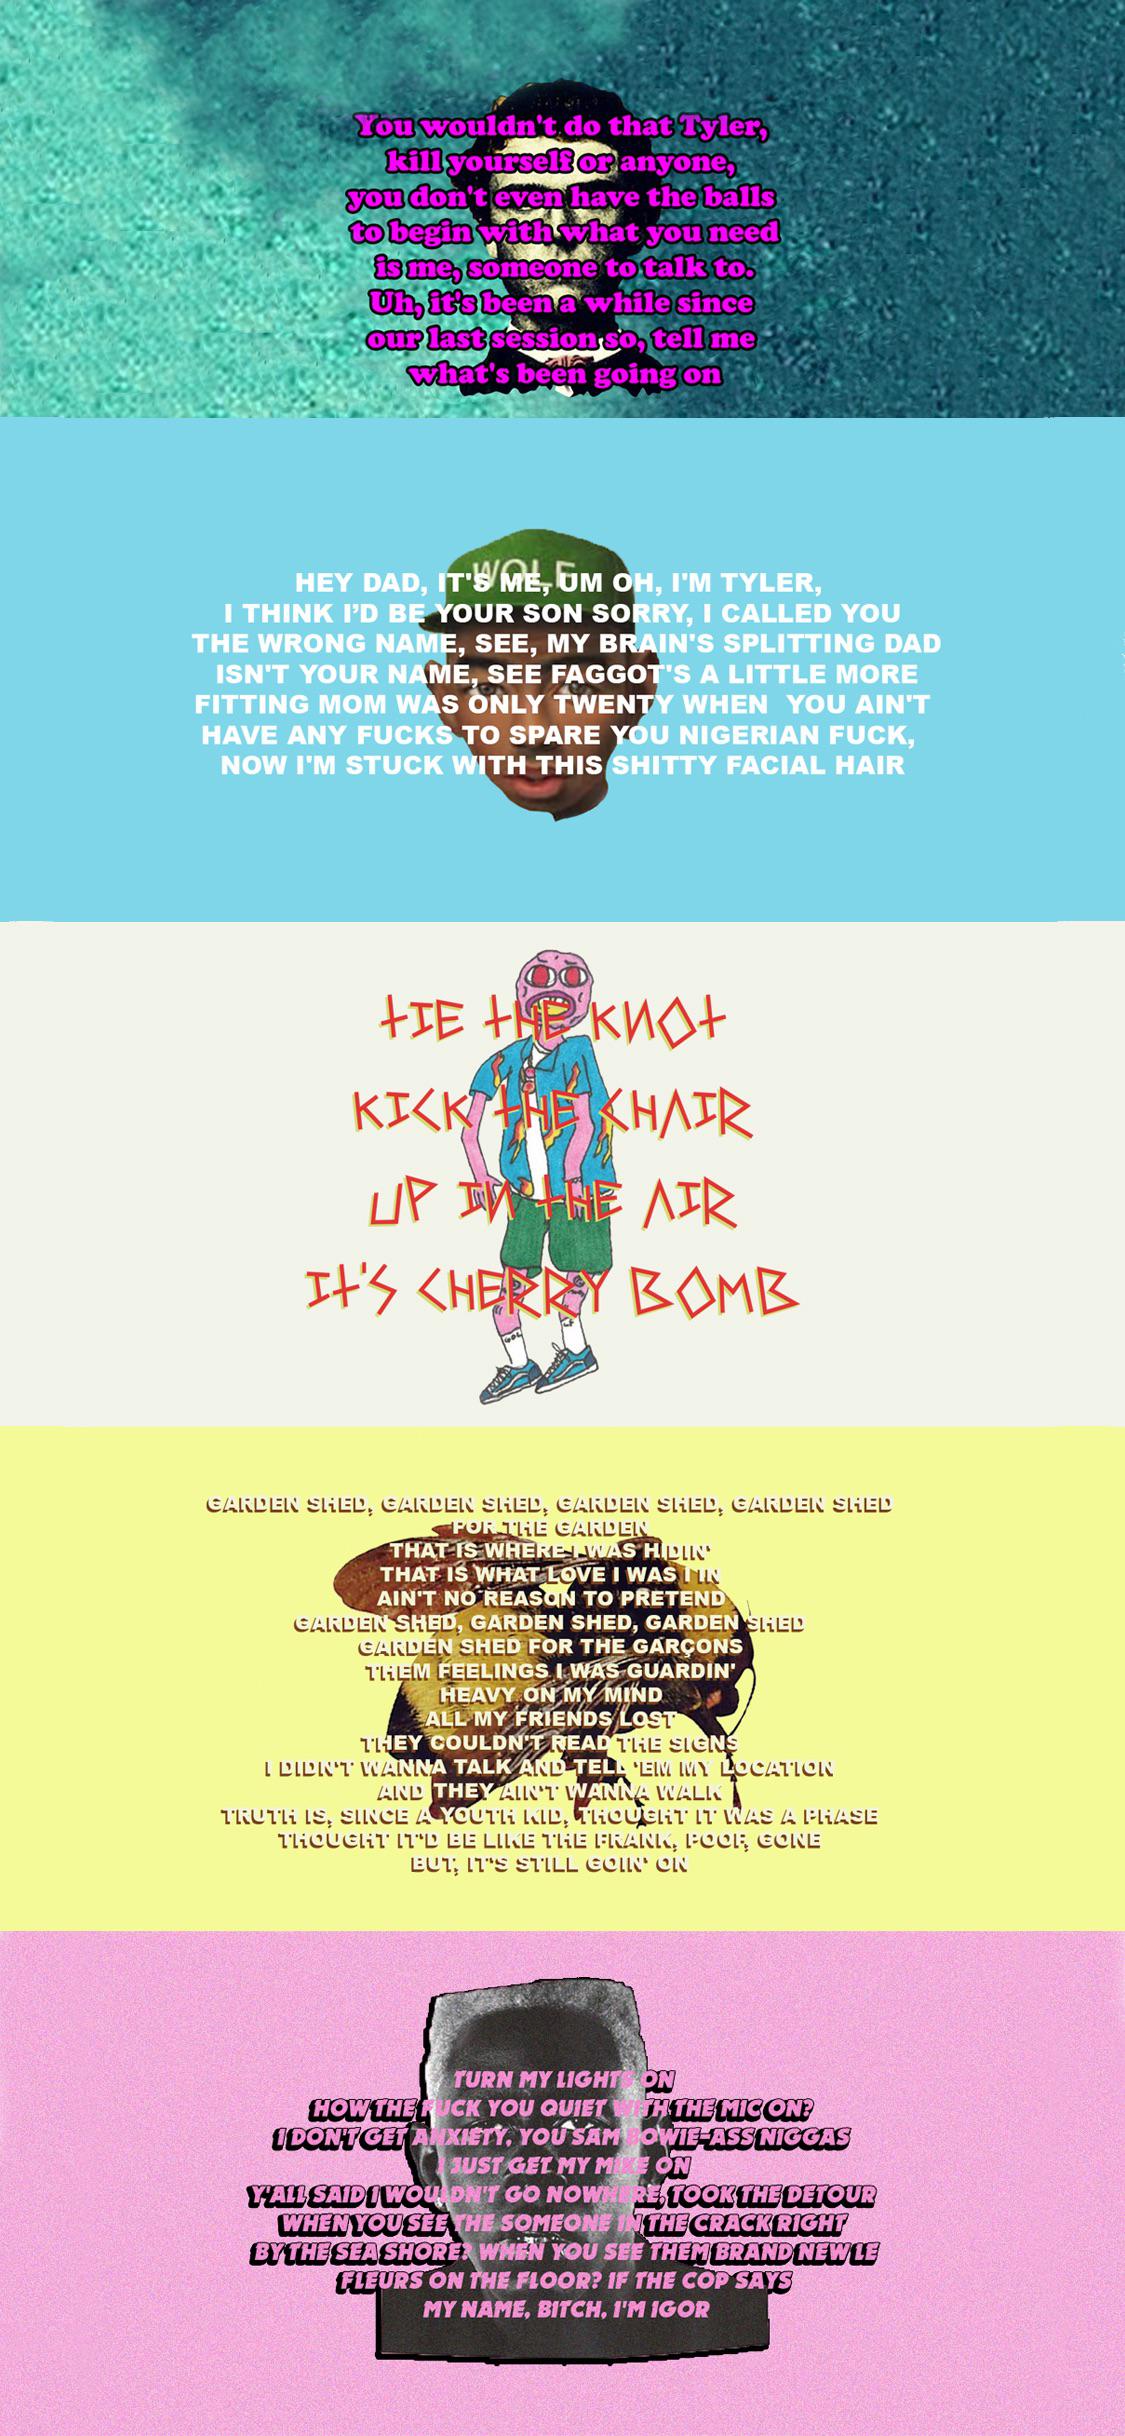 IPhone X XS Wallpaper Of Every Tyler Album, I Didn't Put Bastard Because It's A Mixtape And It Just Would've Made It Harder So It's Just The Albums